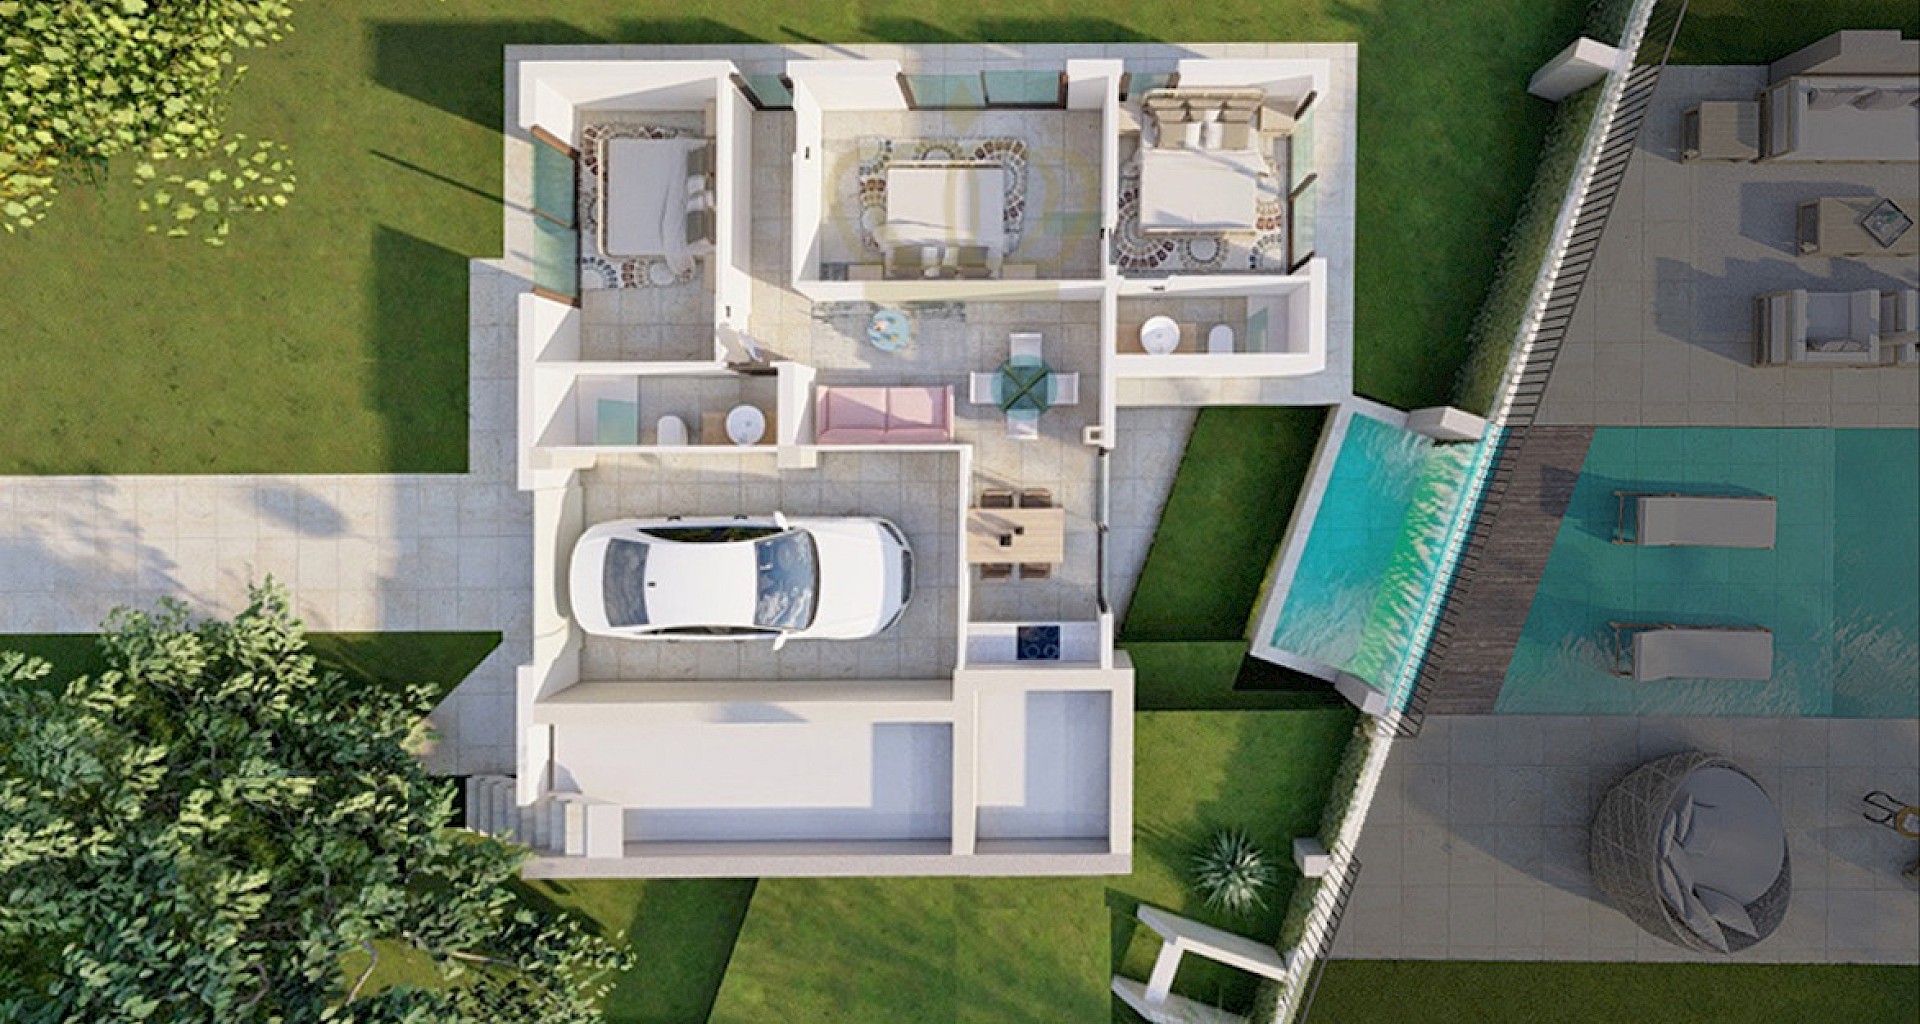 KROHN & LUEDEMANN Top villa project in Mallorca Paguera with building licence 